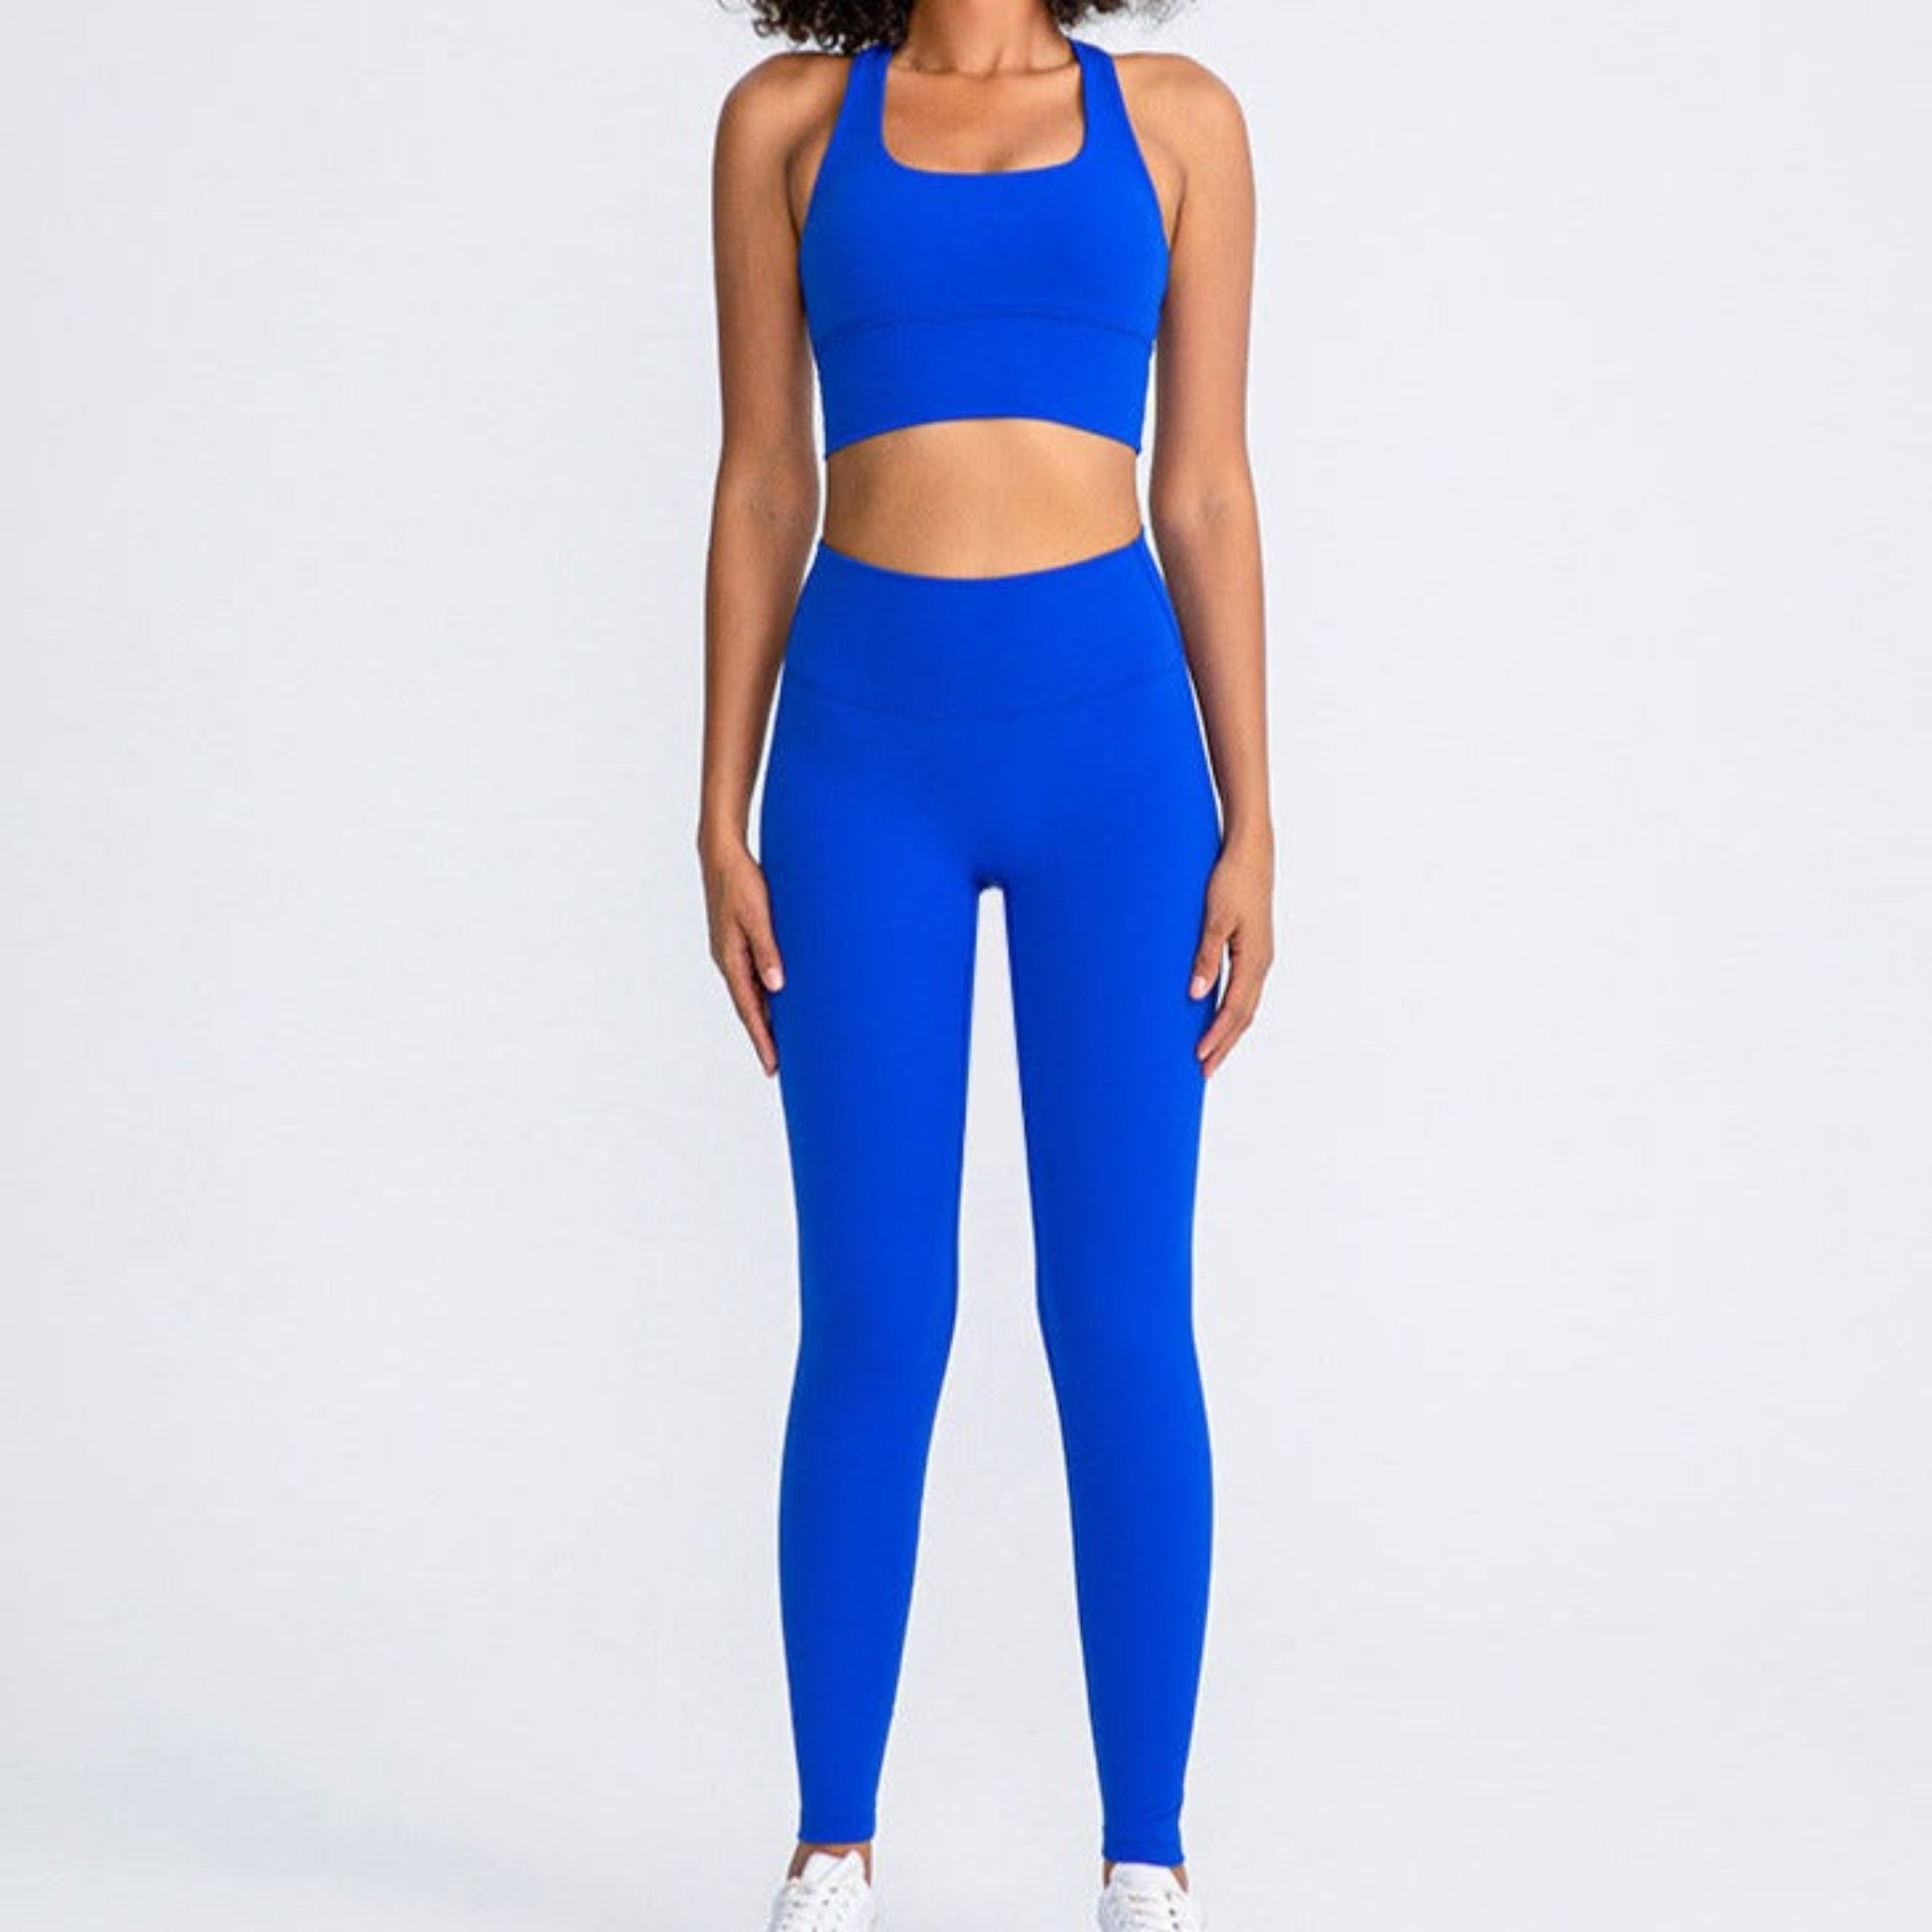 Women Activewear - Bleualps Sports Wear and Gym Wear for Ladies